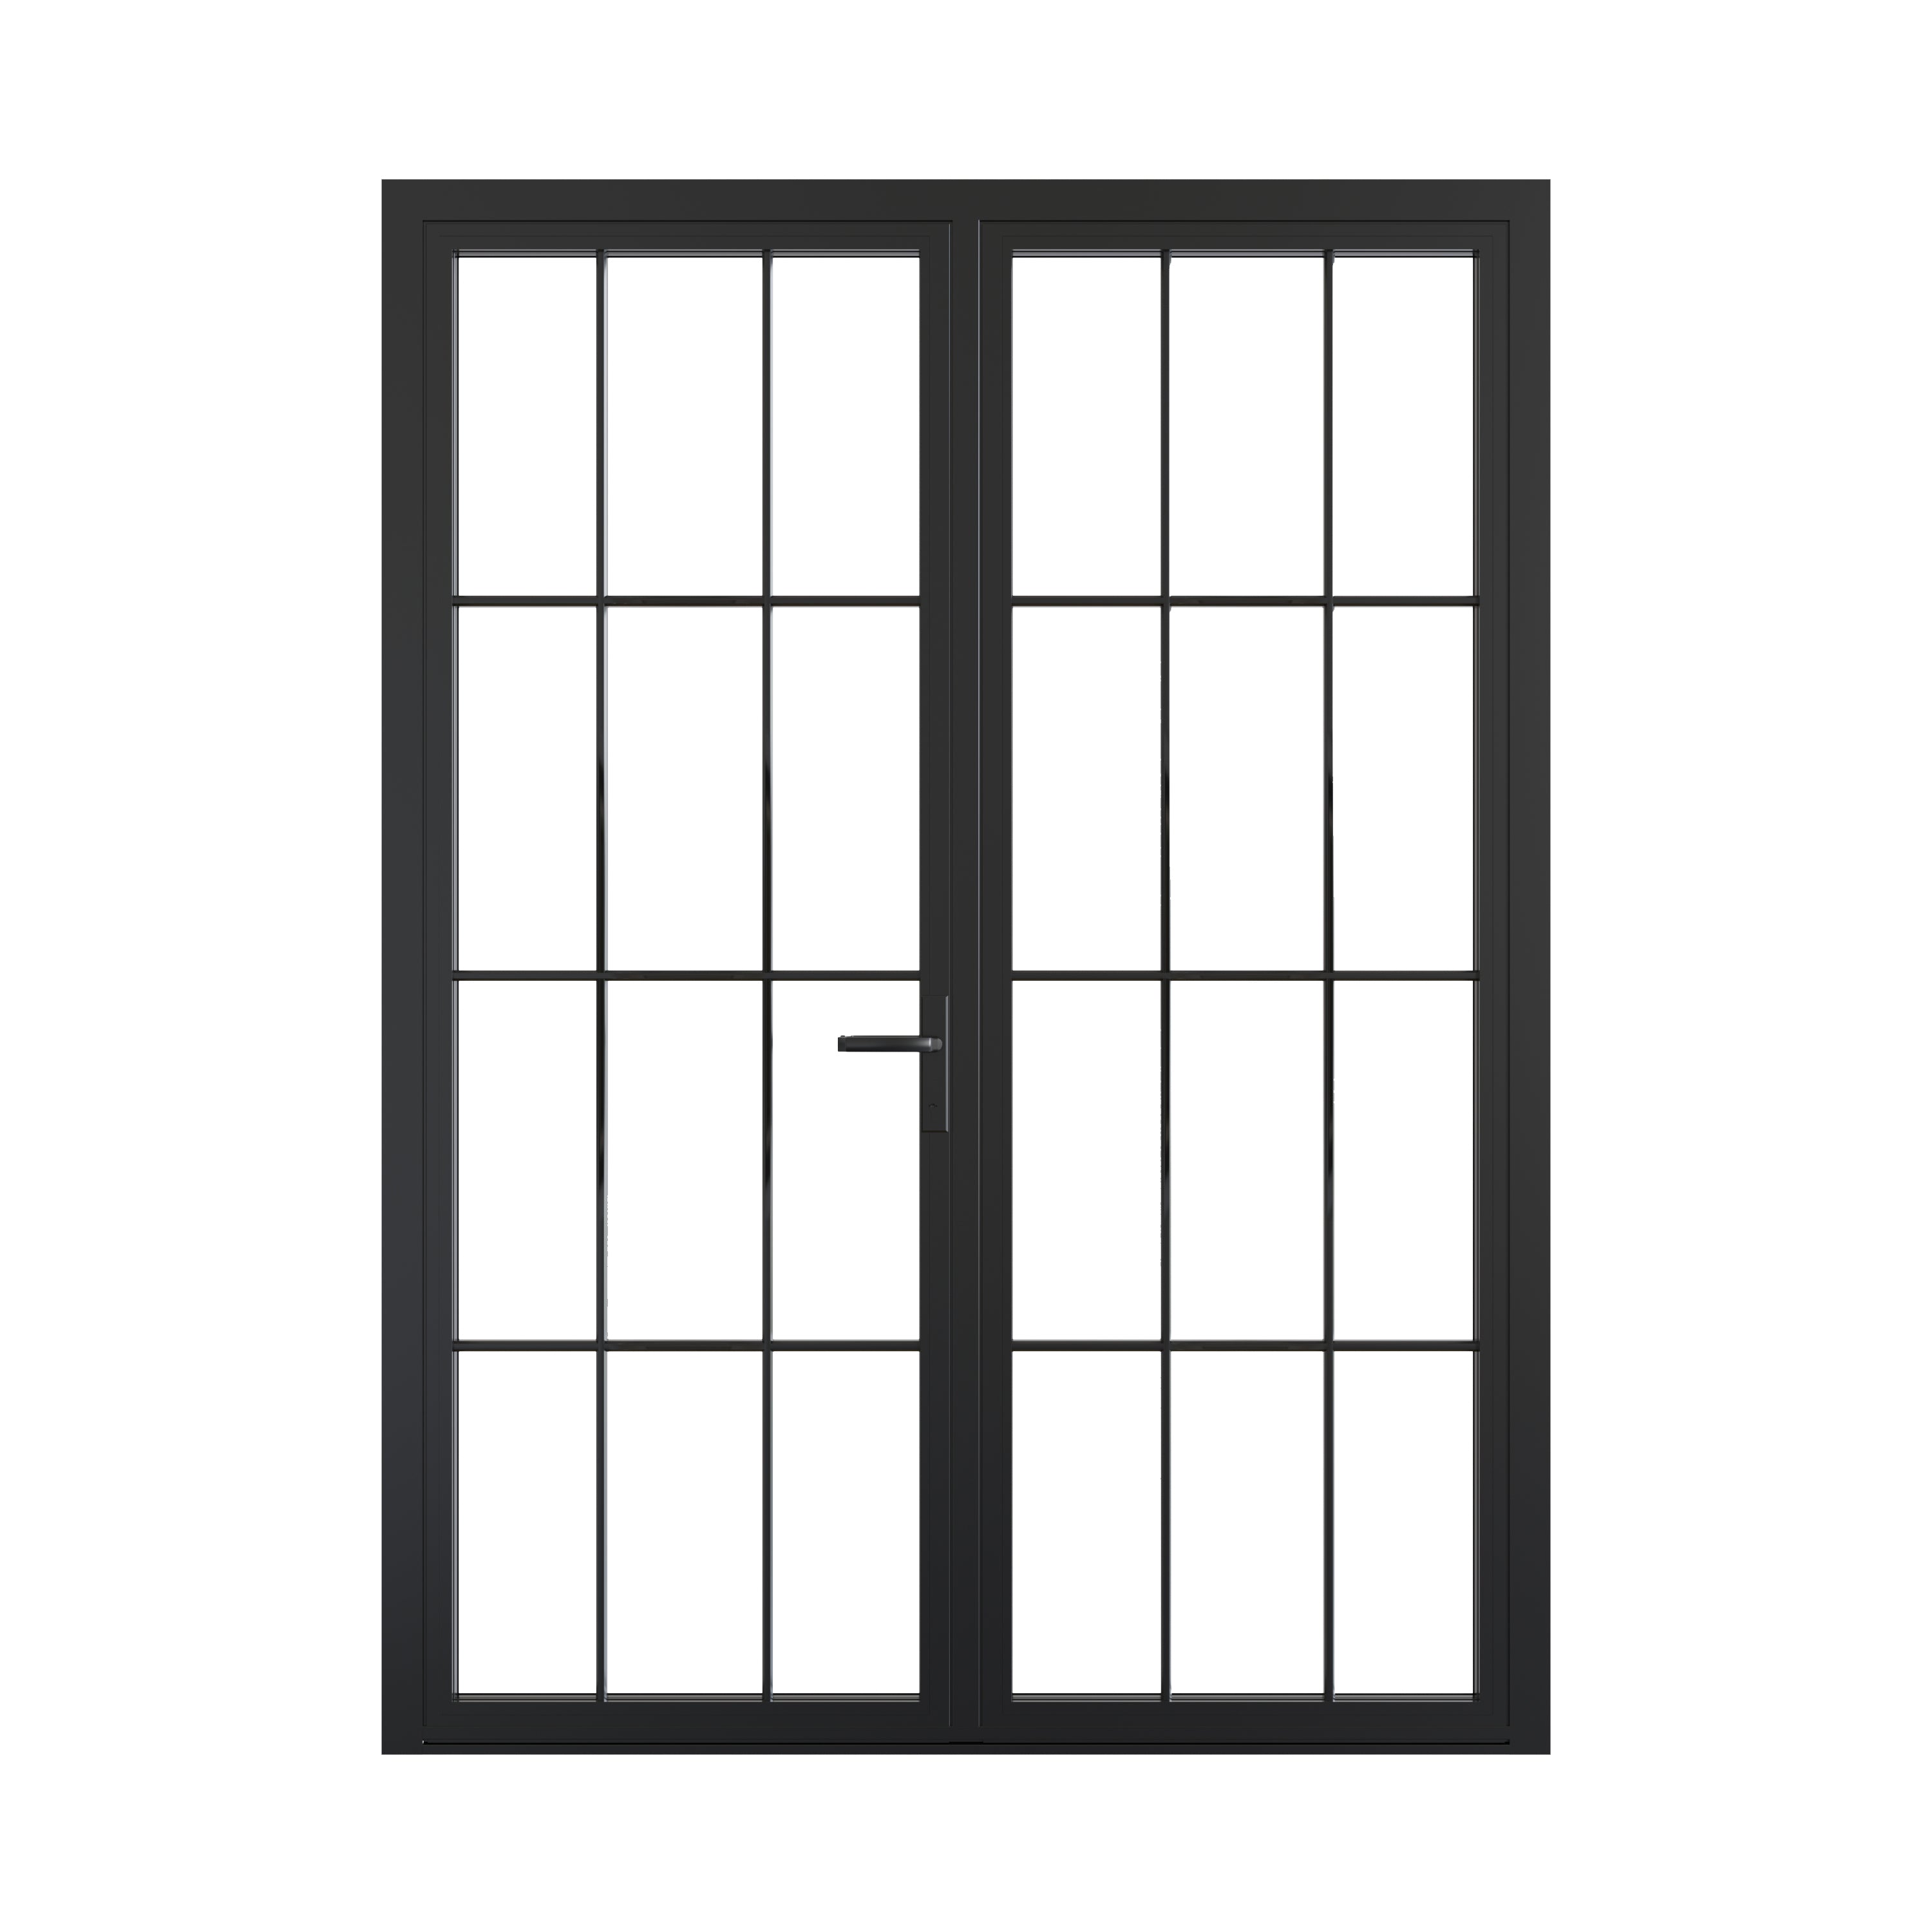 All-Glass Aluminum Metal French Doors - Triple Glazed - Thermally Broken